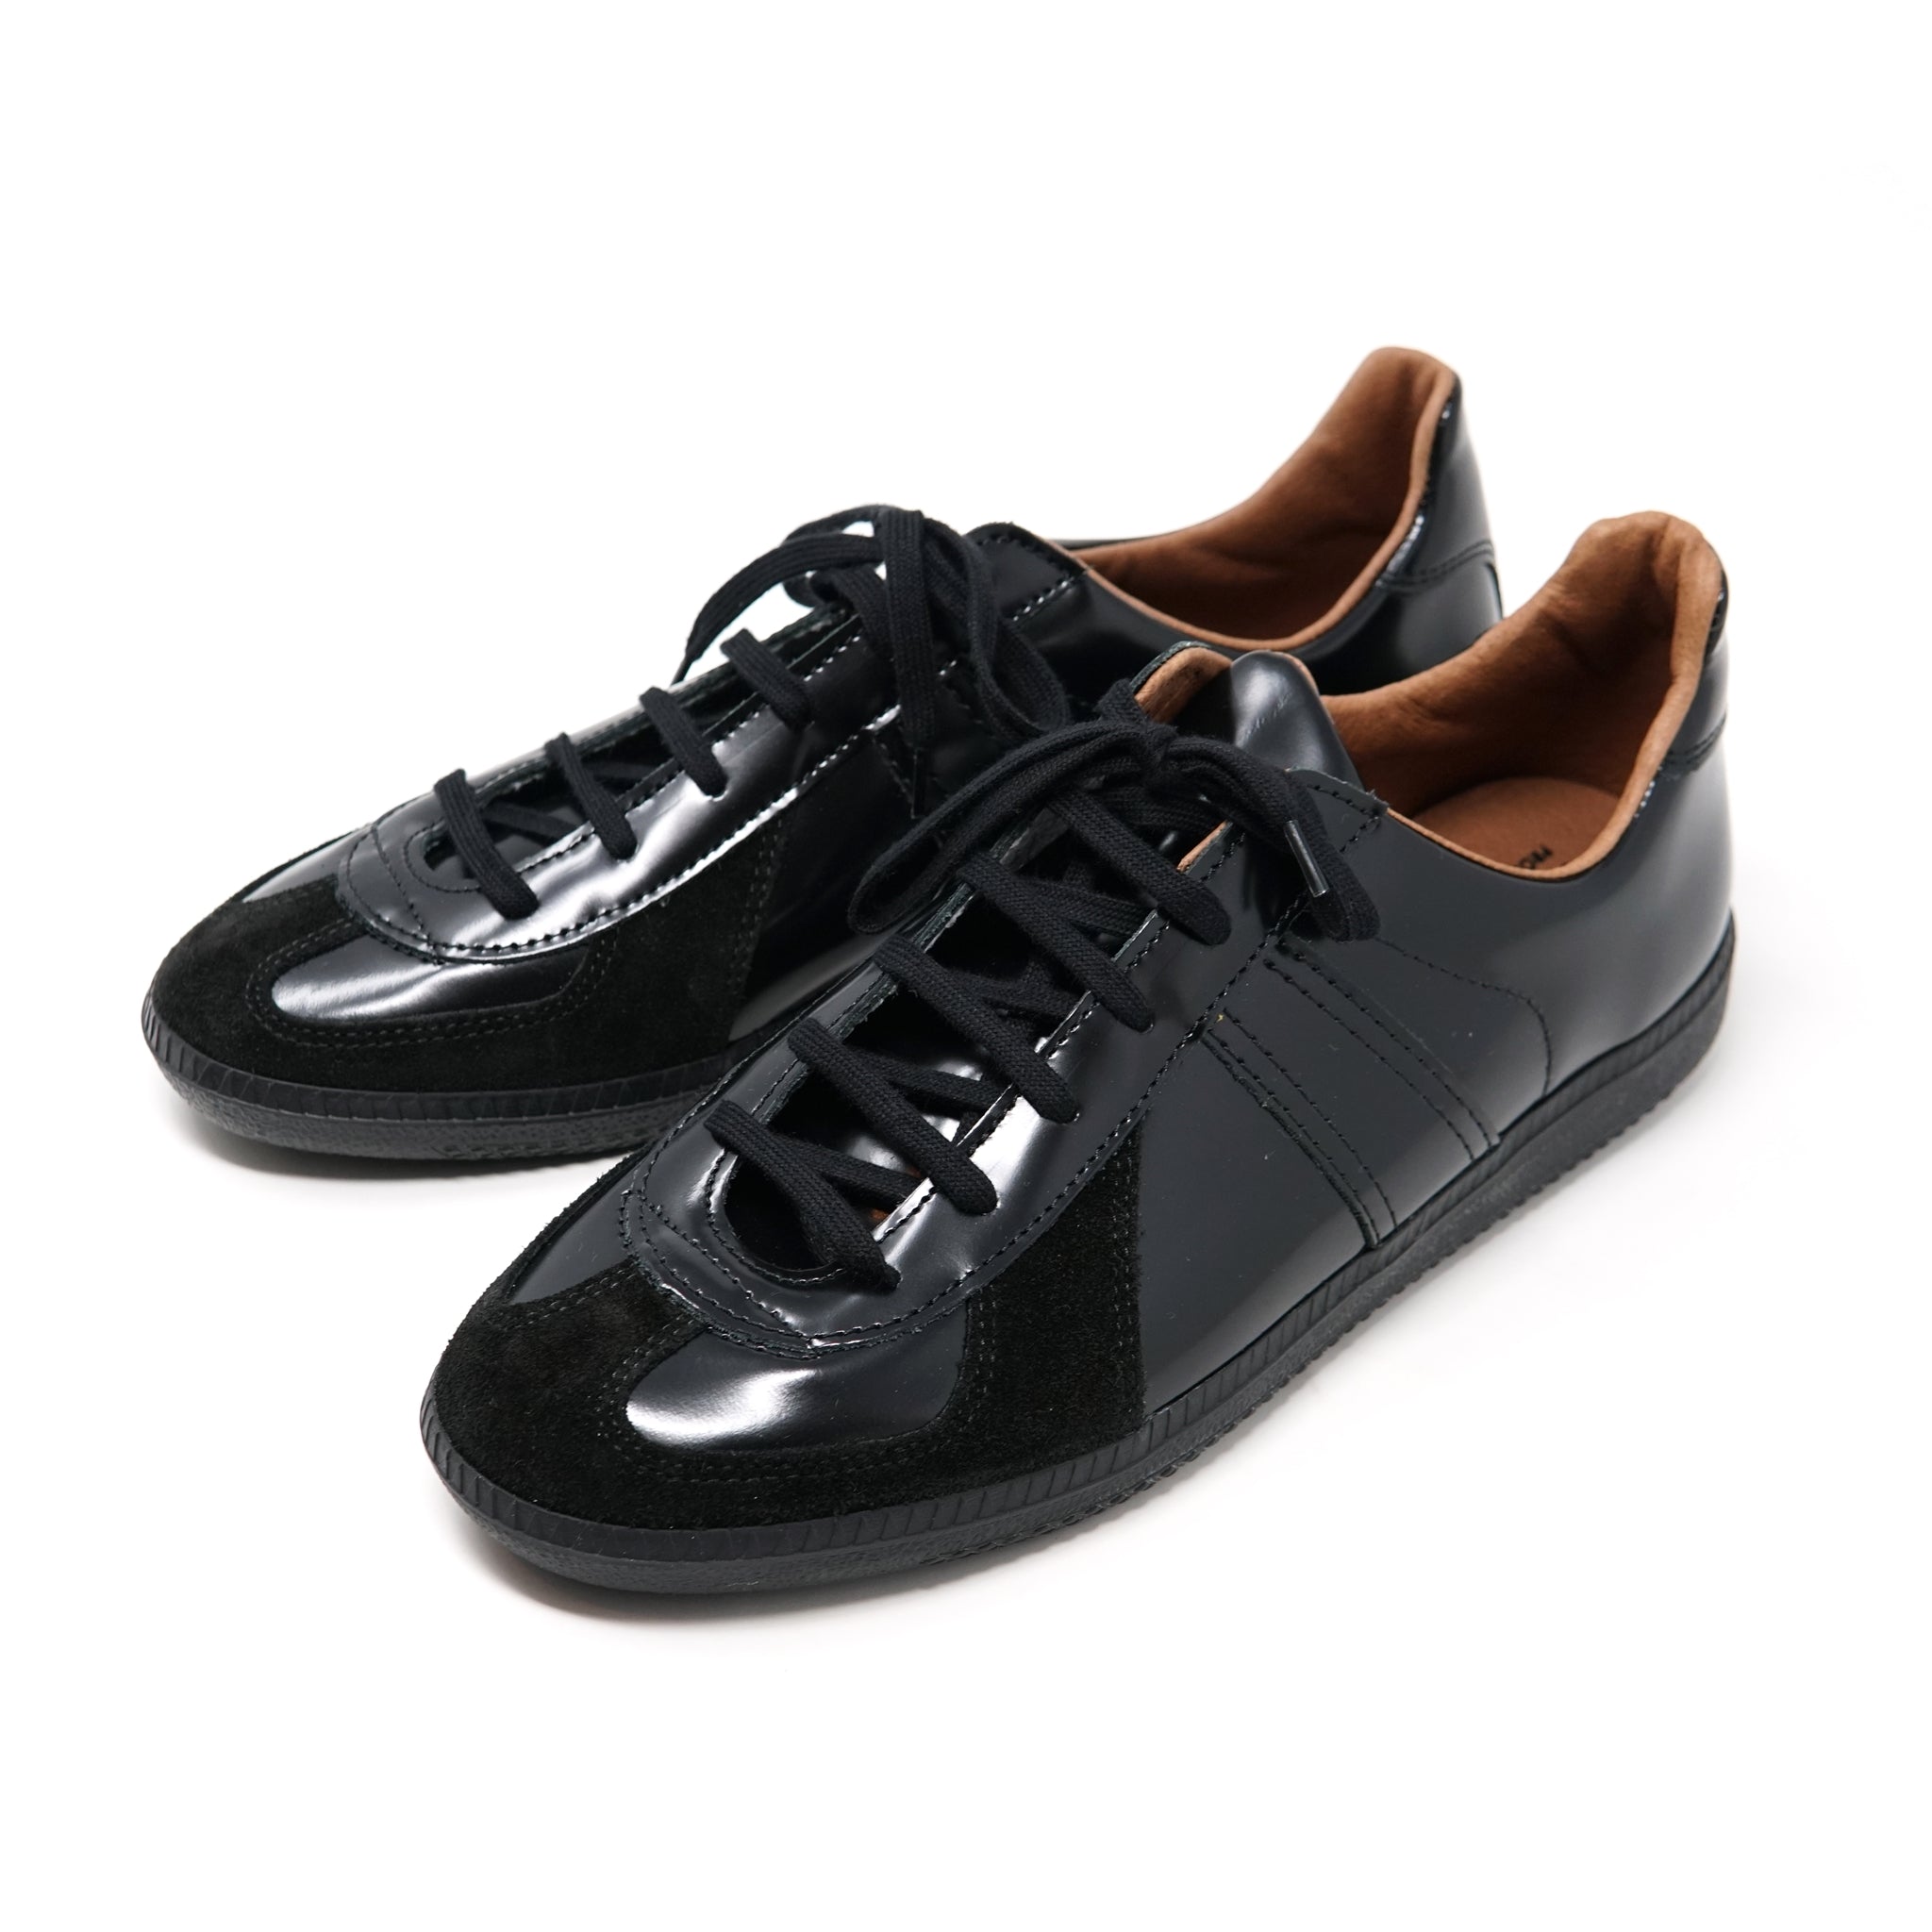 No:1700lux | Name:GERMAN MILITARY TRAINER | Color:Black